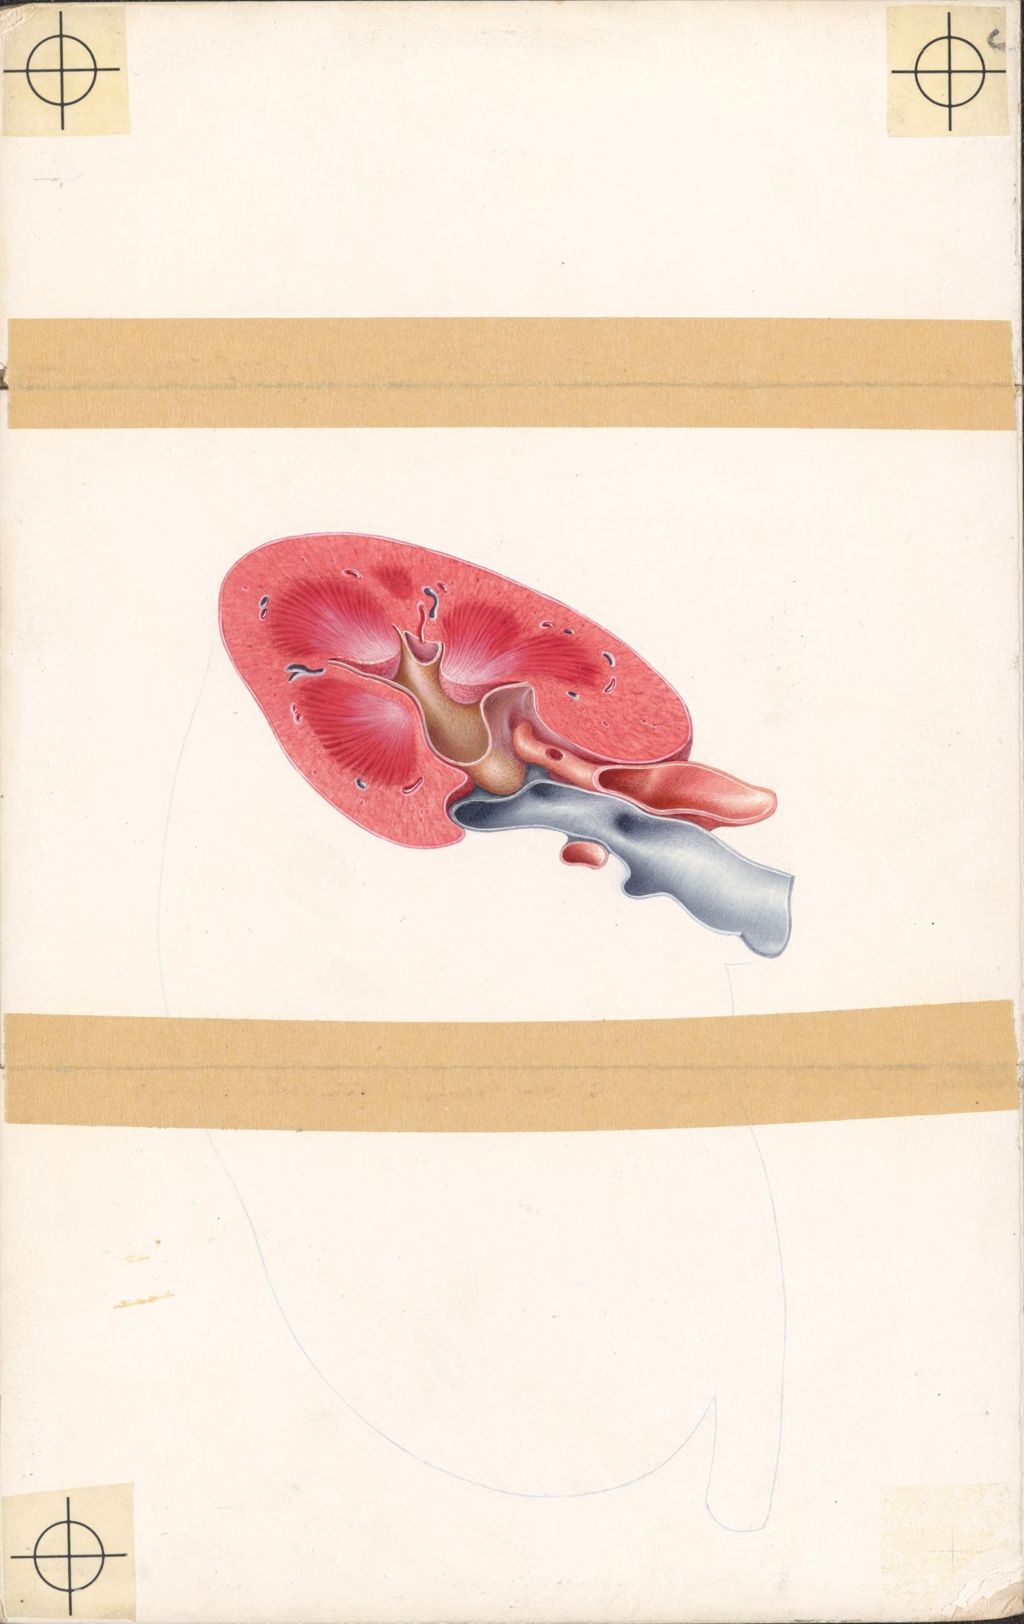 Miniature of Section of the kidney